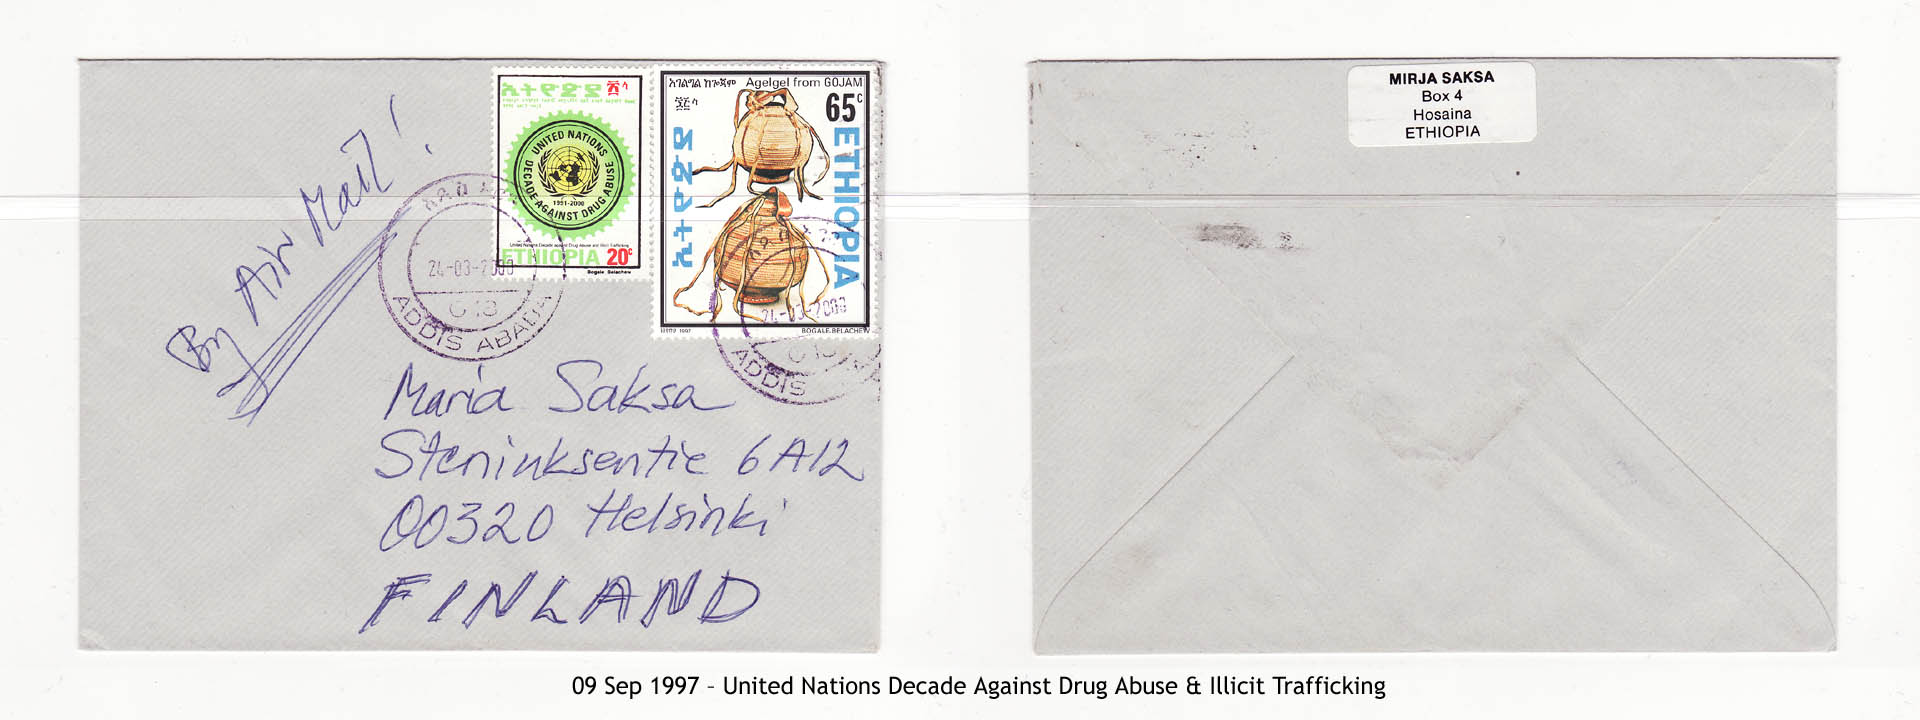 19970909 – United Nations Decade Against Drug Abuse & Illicit Trafficking